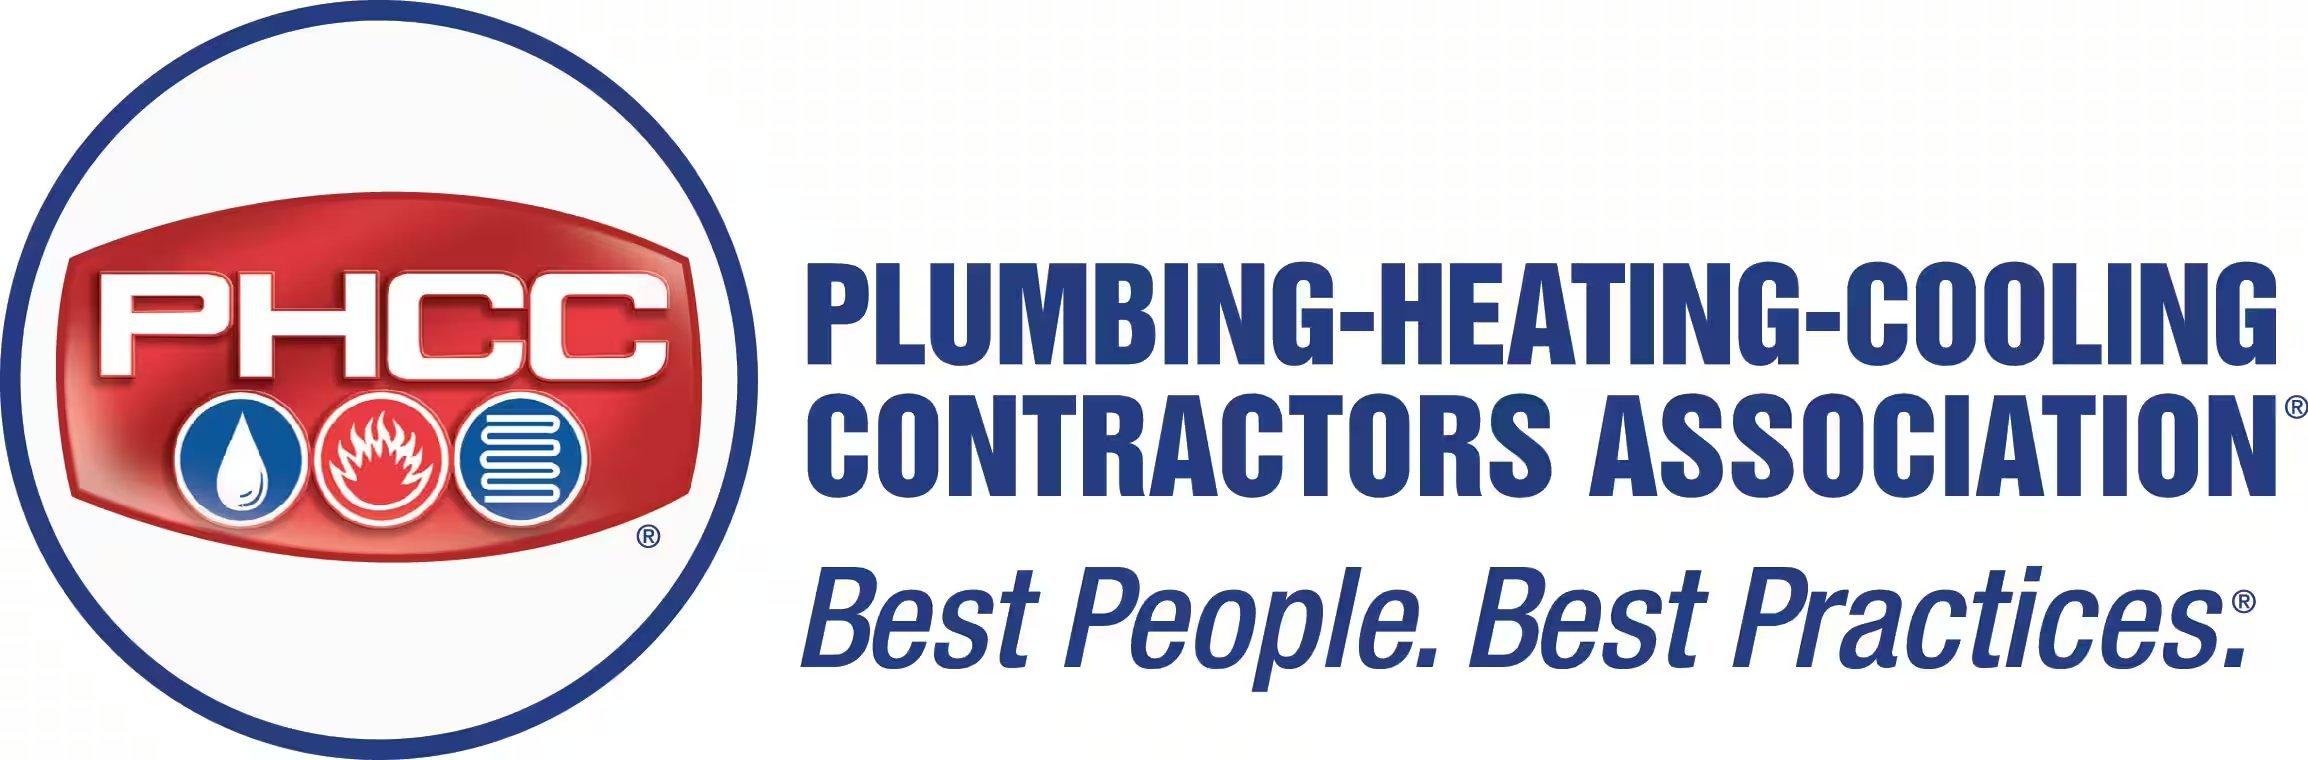 Plumbing-Heating-Cooling Contractors Association logo with blue text that reads Best People. Best Practices.